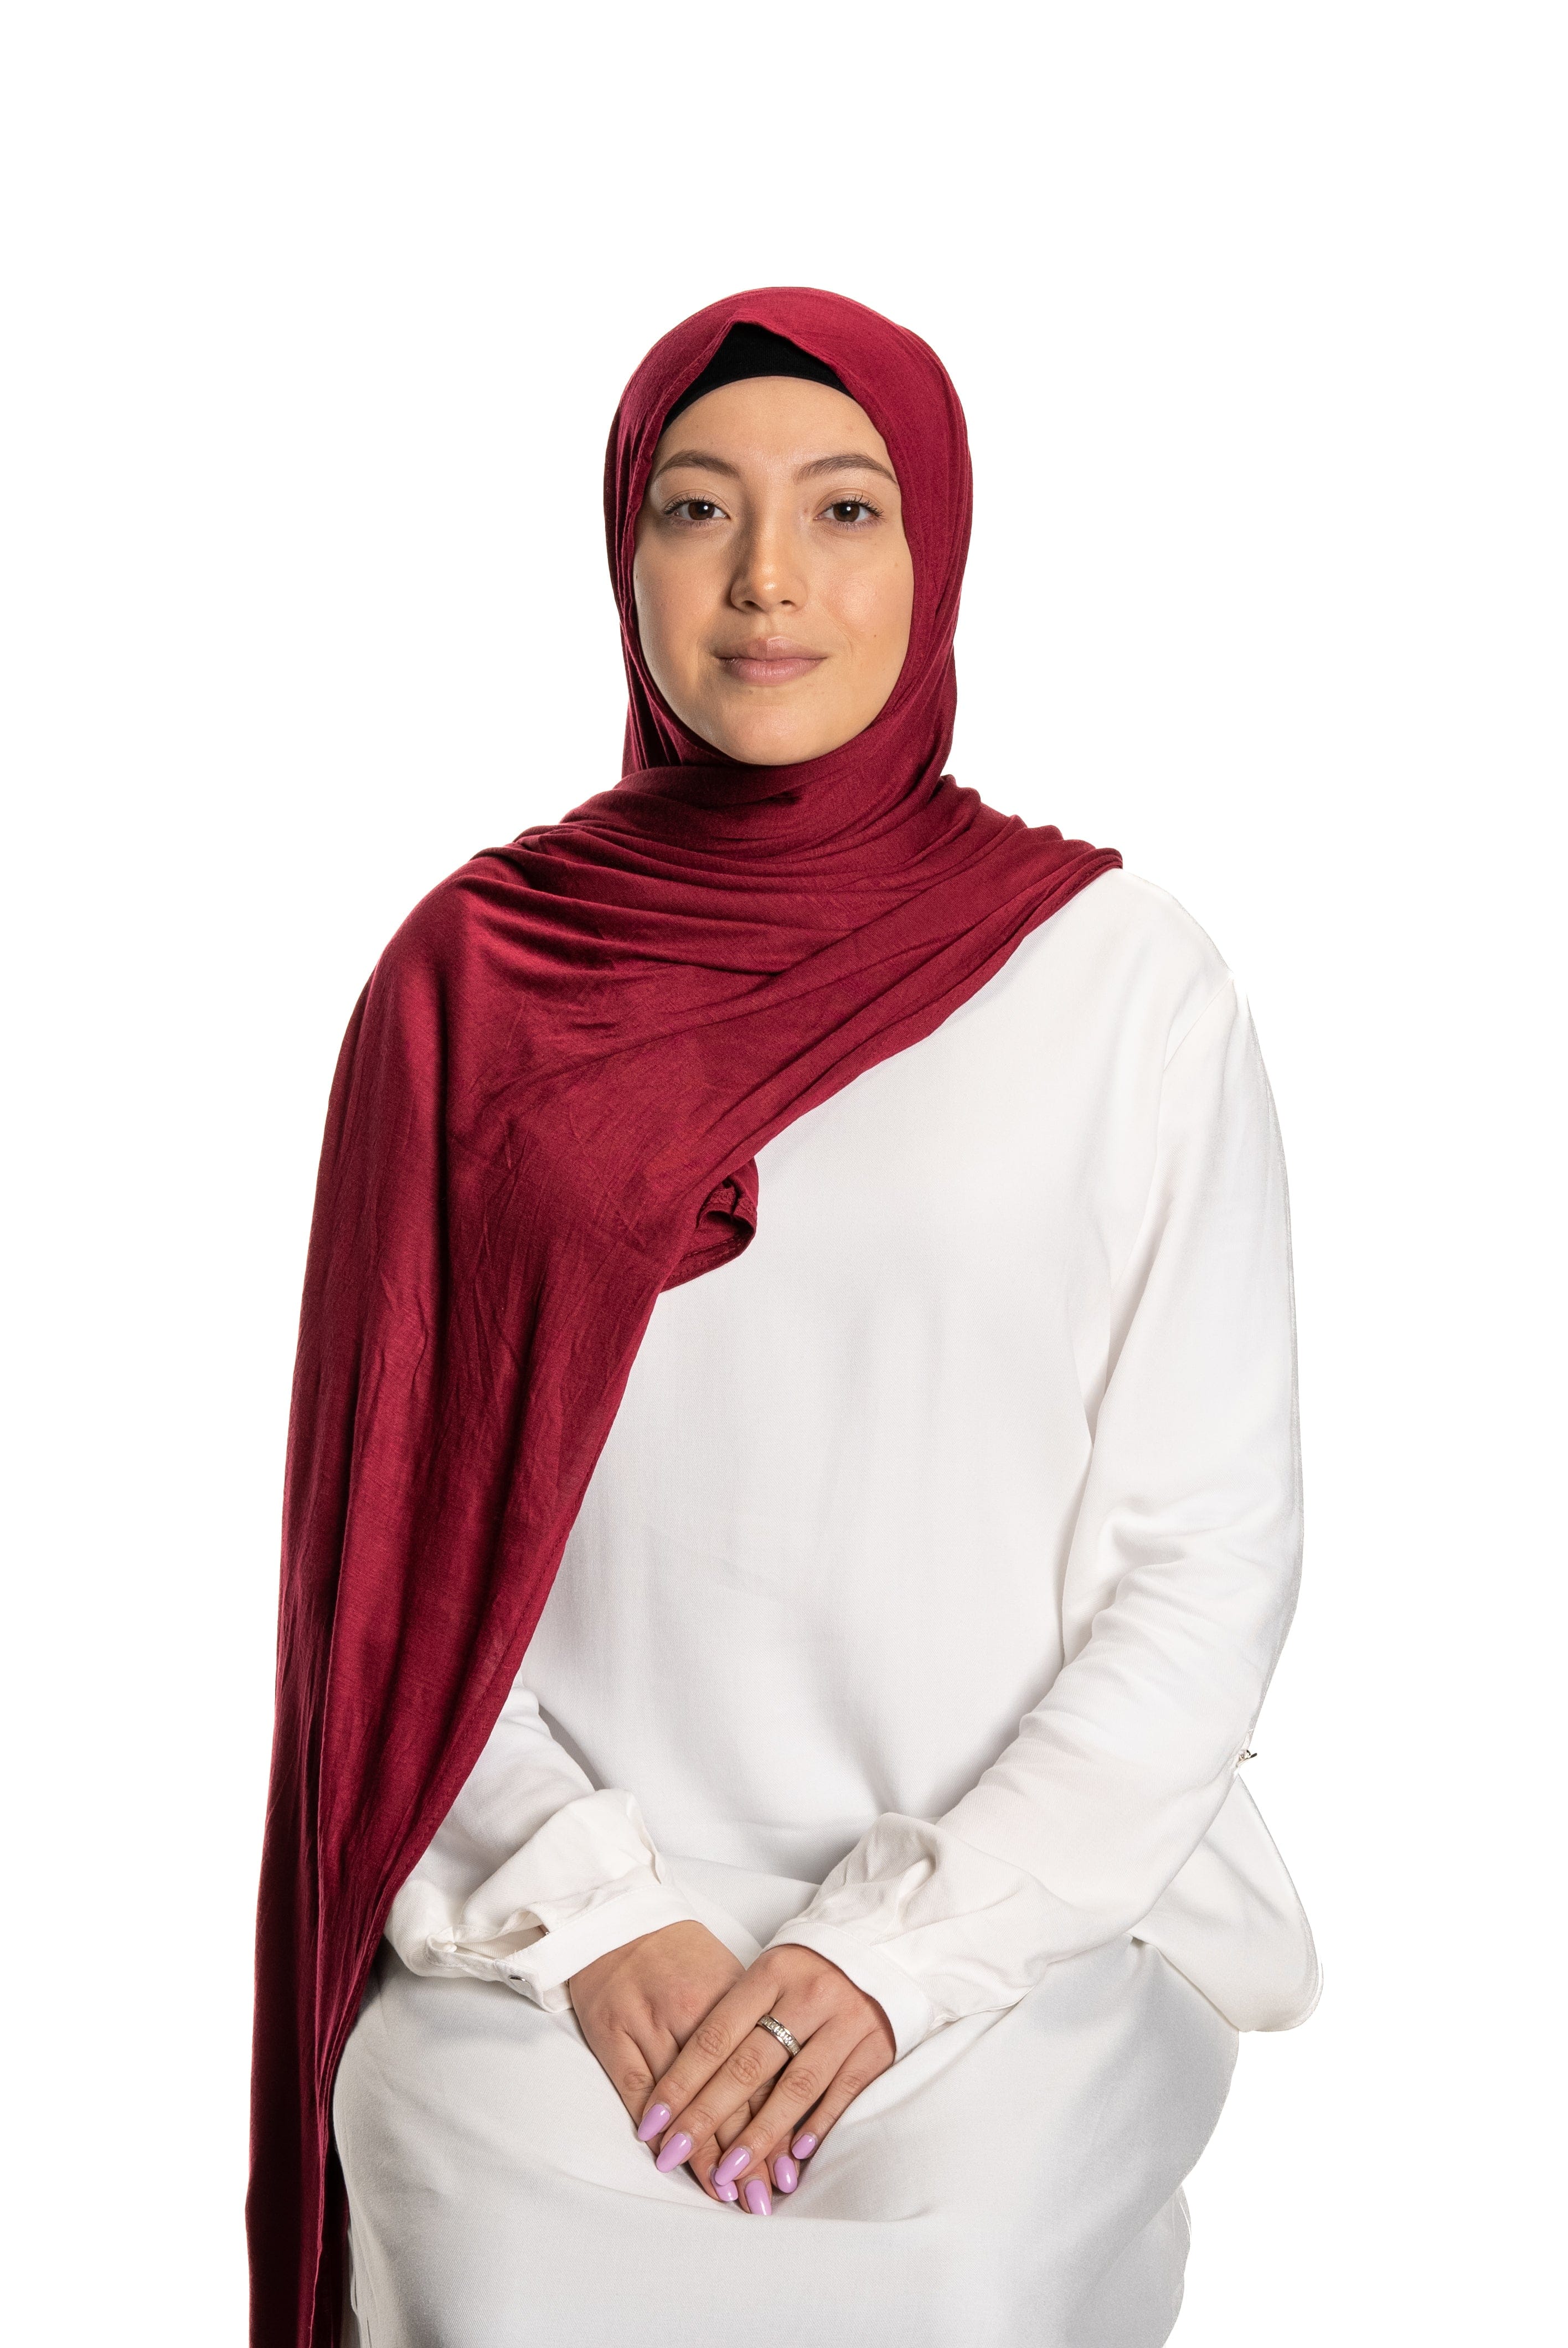 Jolie Nisa Hijab Cranberry Premium Slip-on Jersey Instant Head Scarf Wrap for Effortless and Stylish Hijab Wear Premium Slip-on instant Jersey Head Scarf Wrap for Effortless and Stylish Hijab Wear!